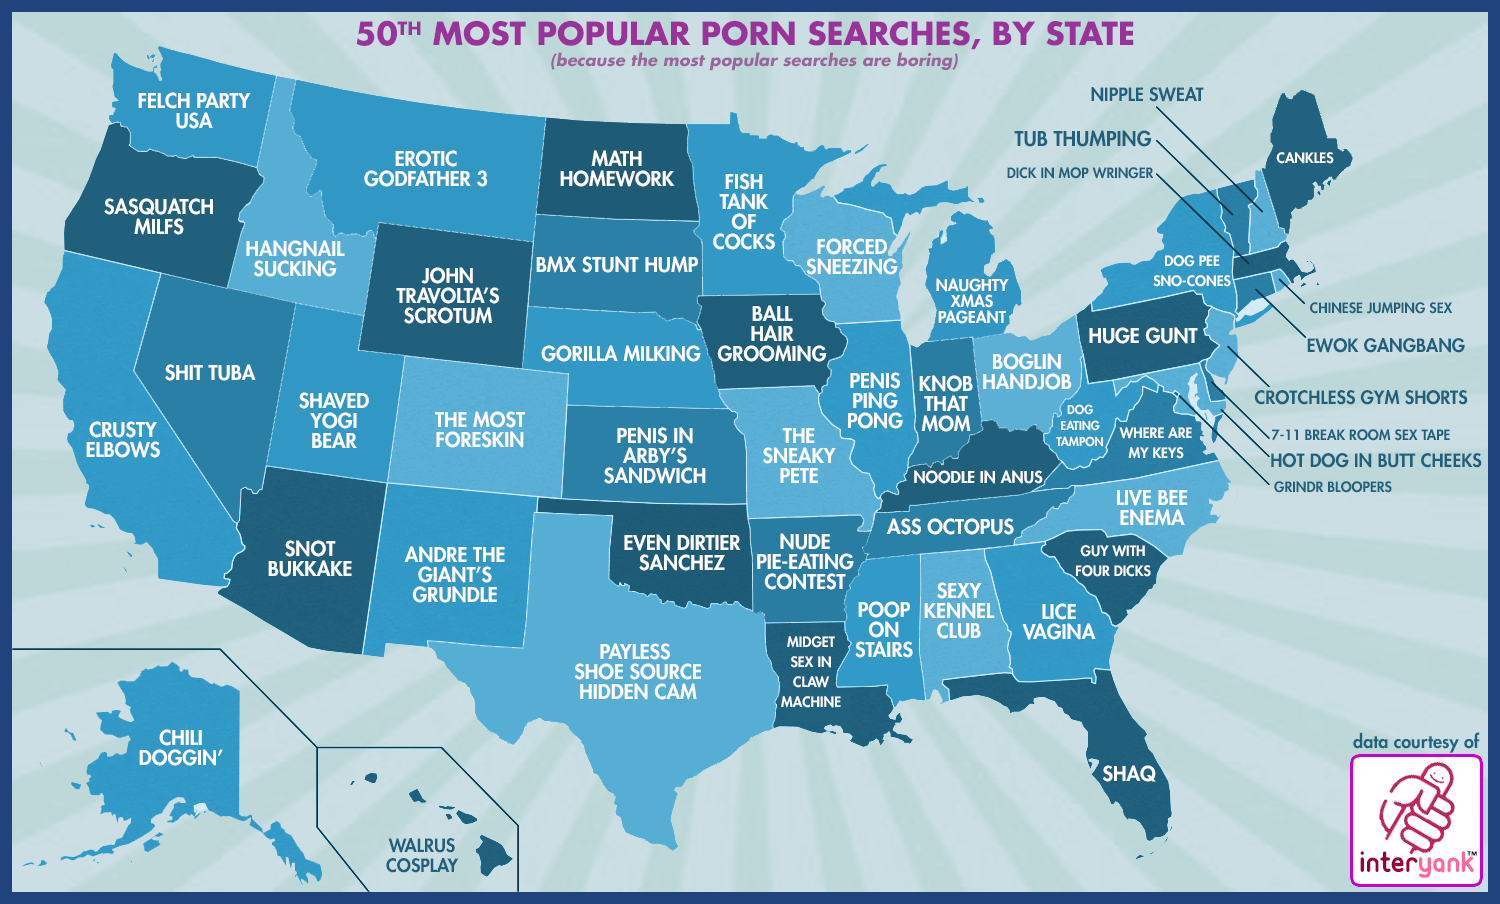 50th Most Popular Porn Searches by State